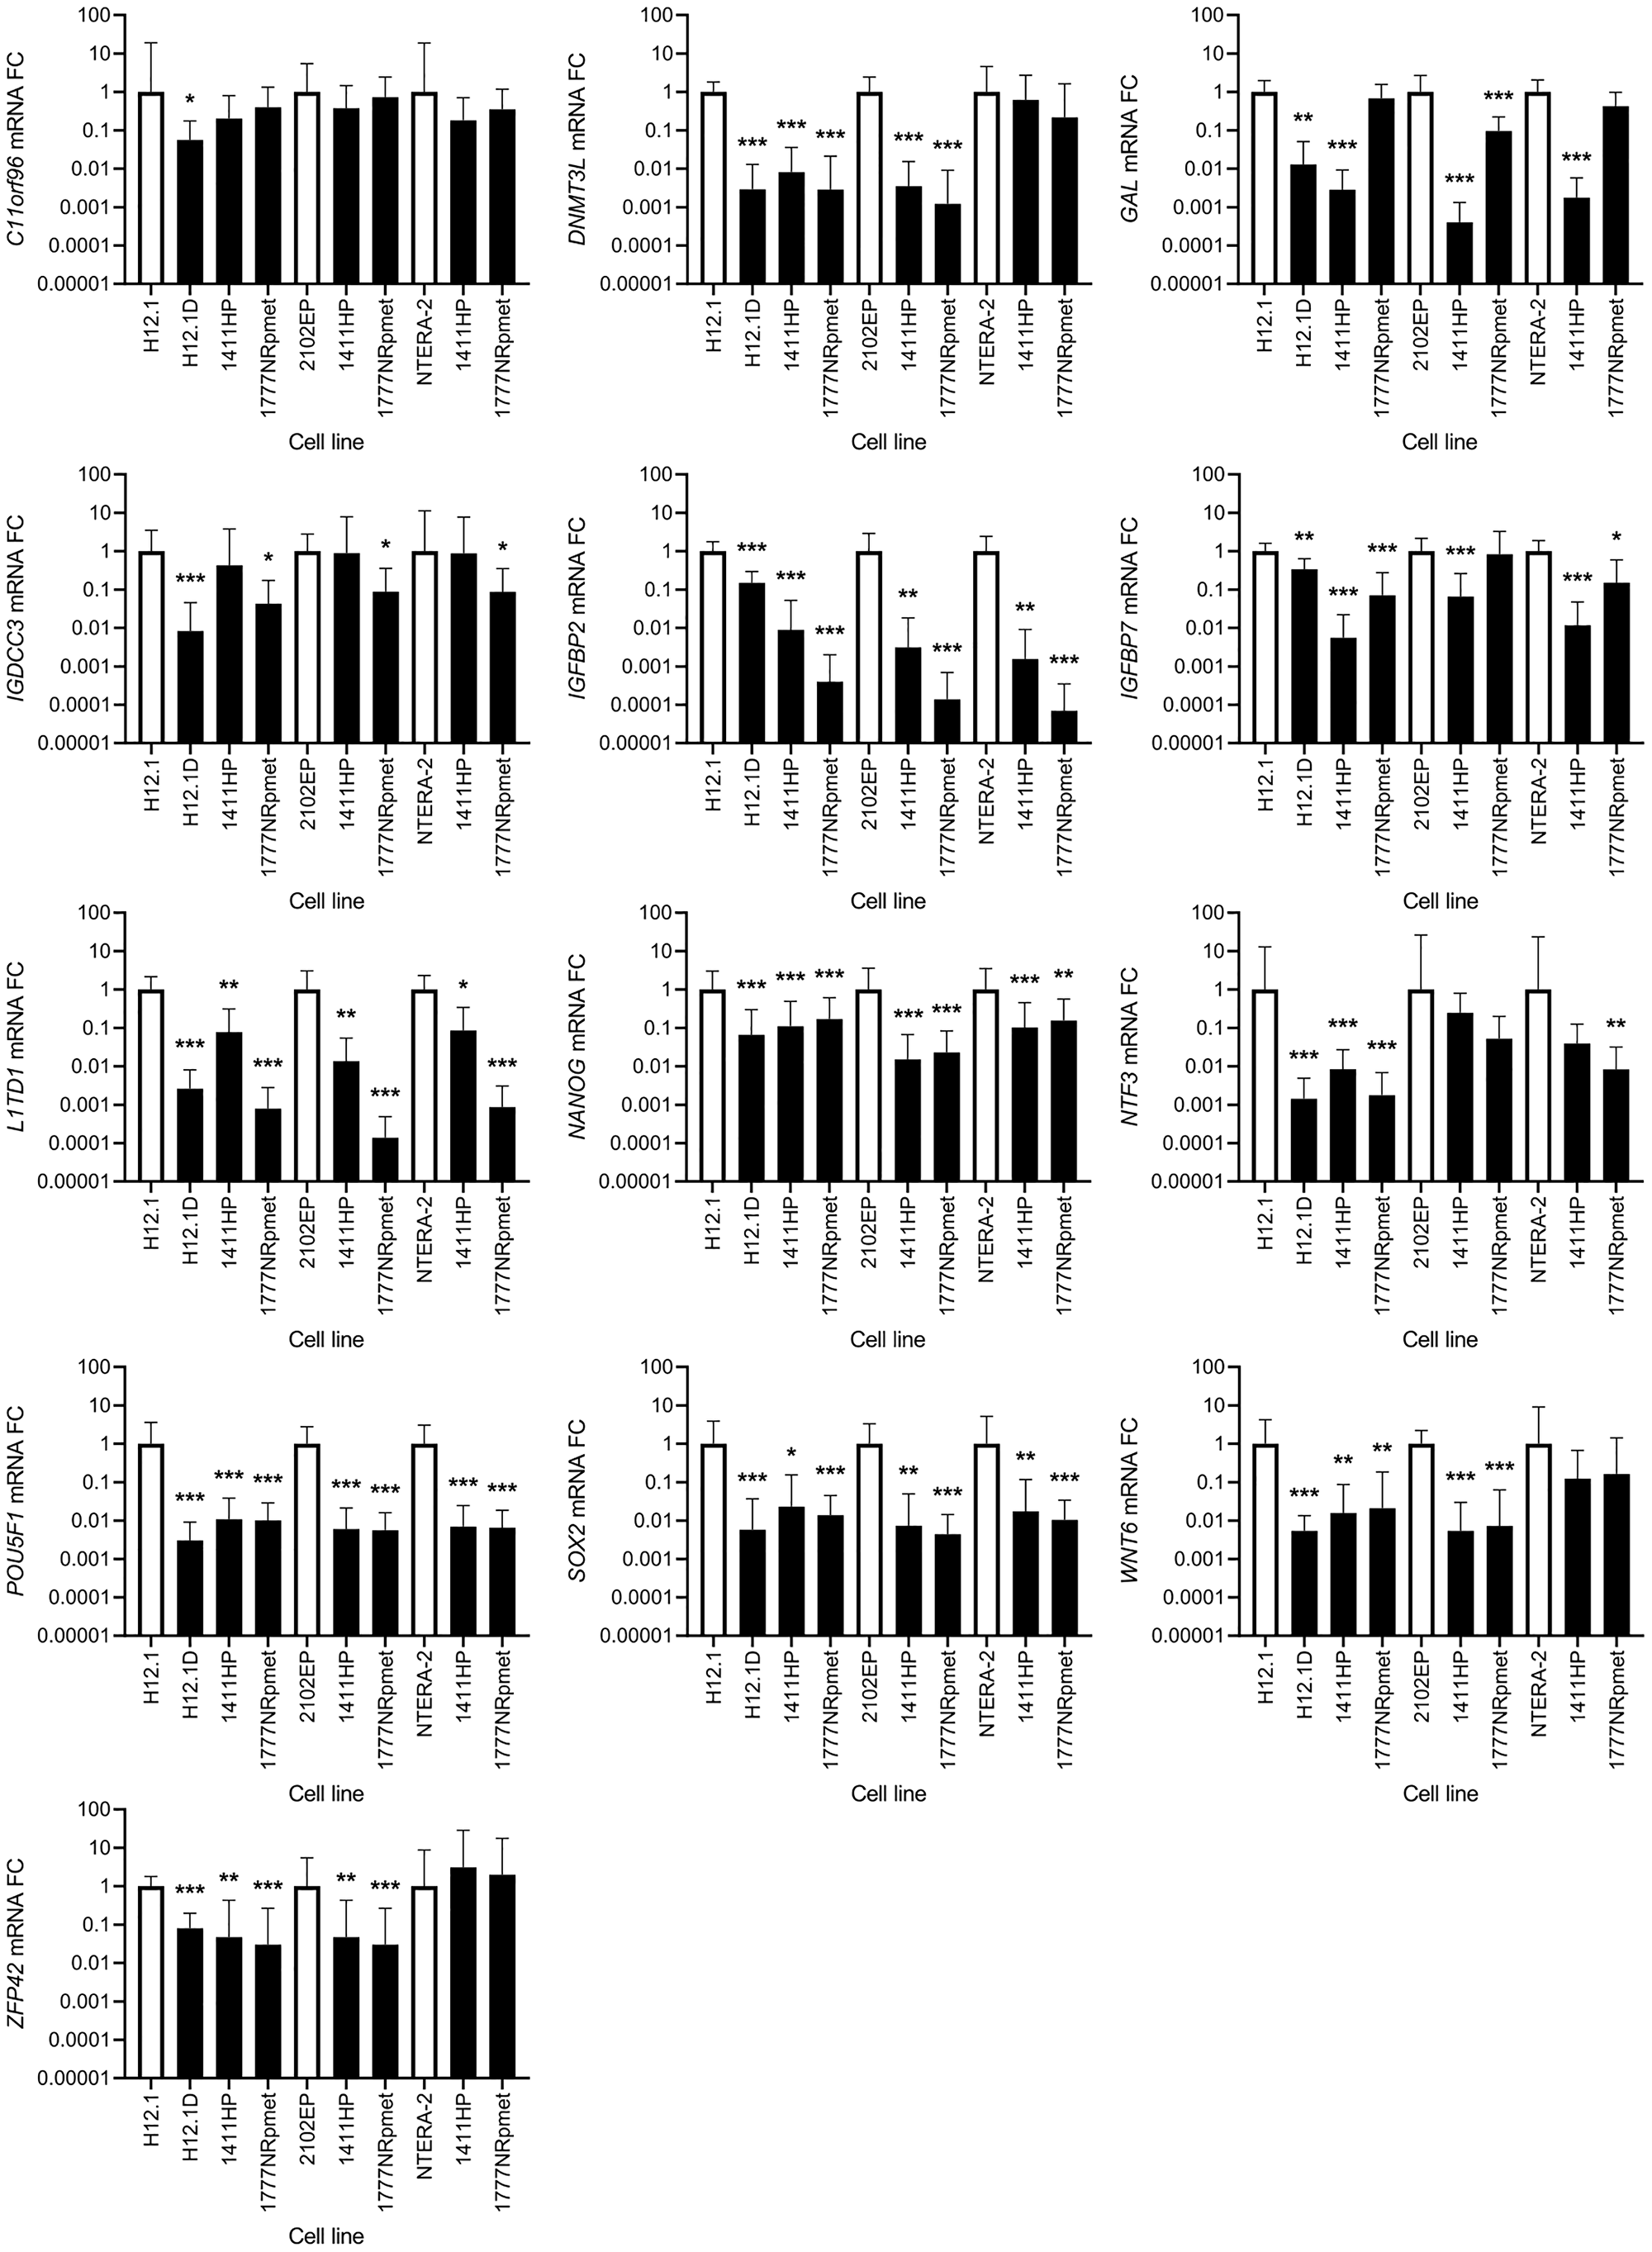 Expression change of 13 candidate genes that were originally identified as down-regulated using gene expression array.